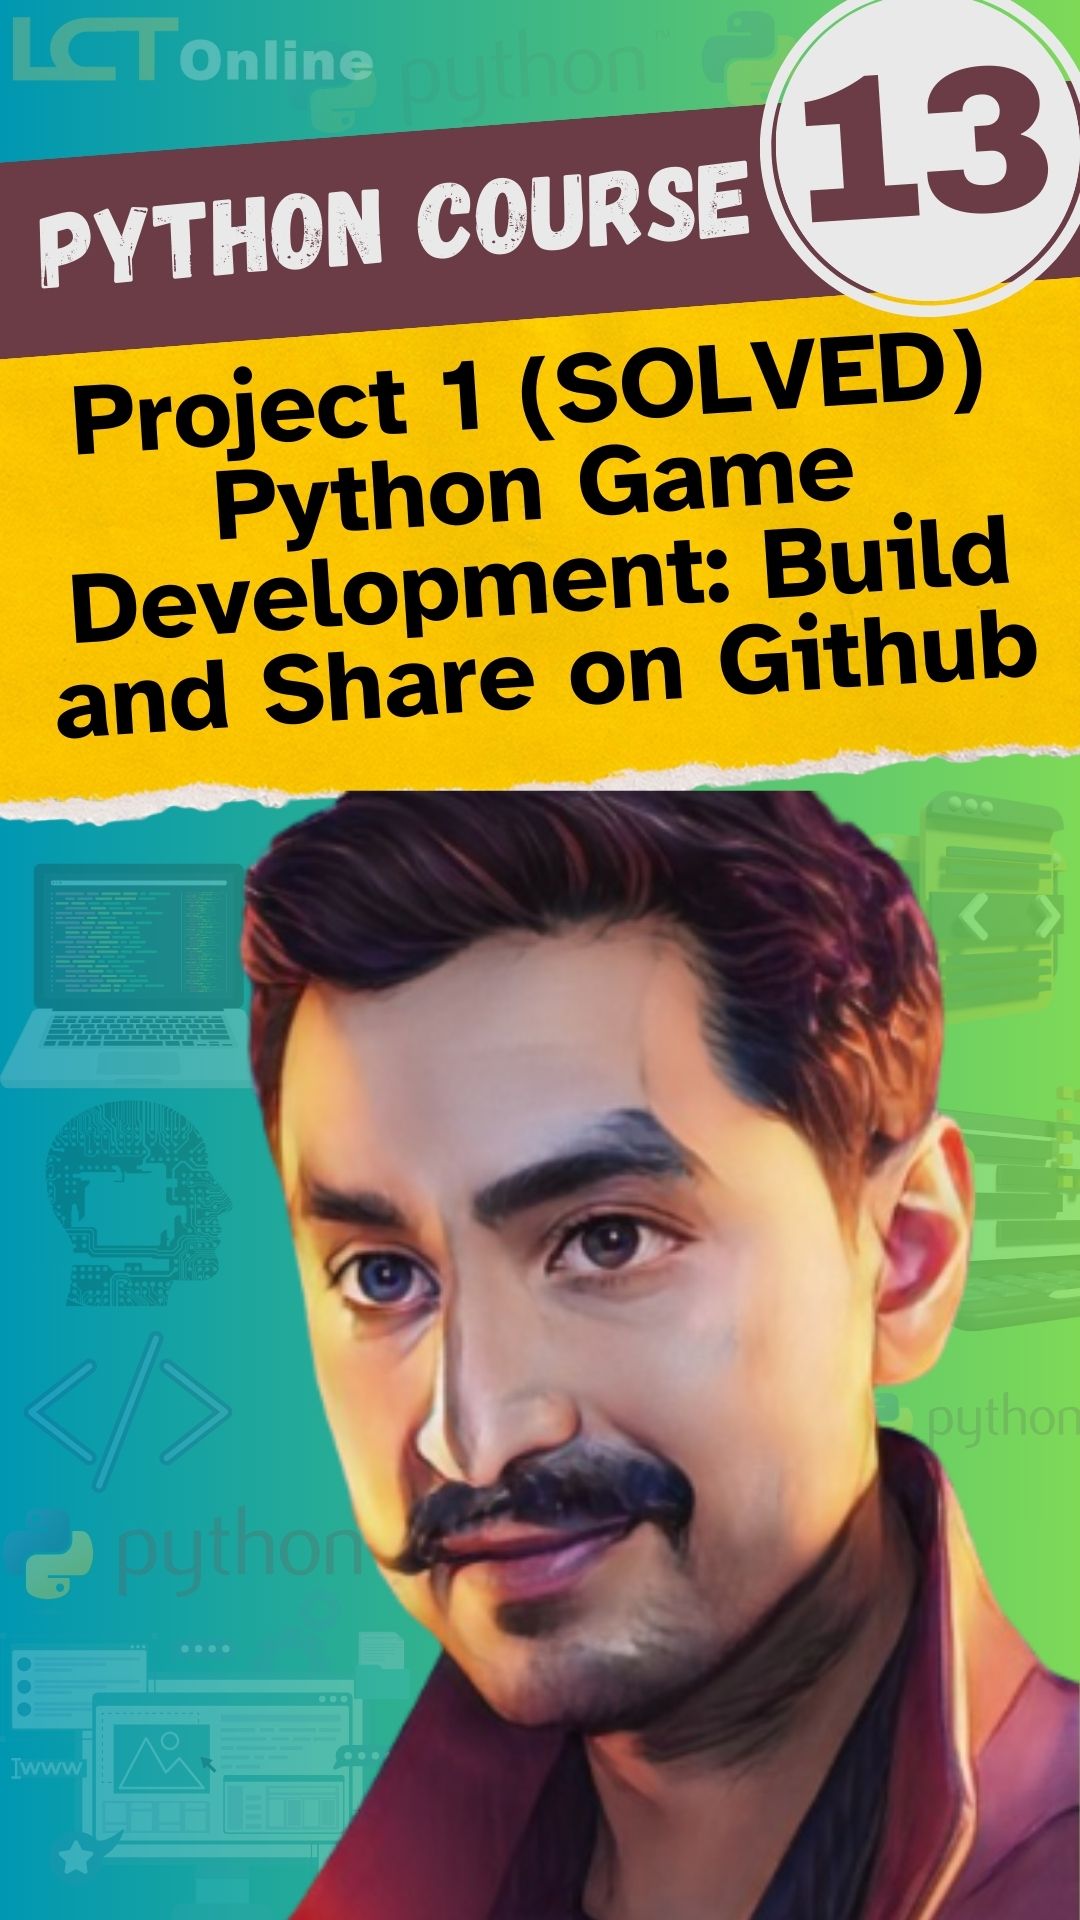 Project 1 (SOLVED) Python Game Development: Build and Share on Github